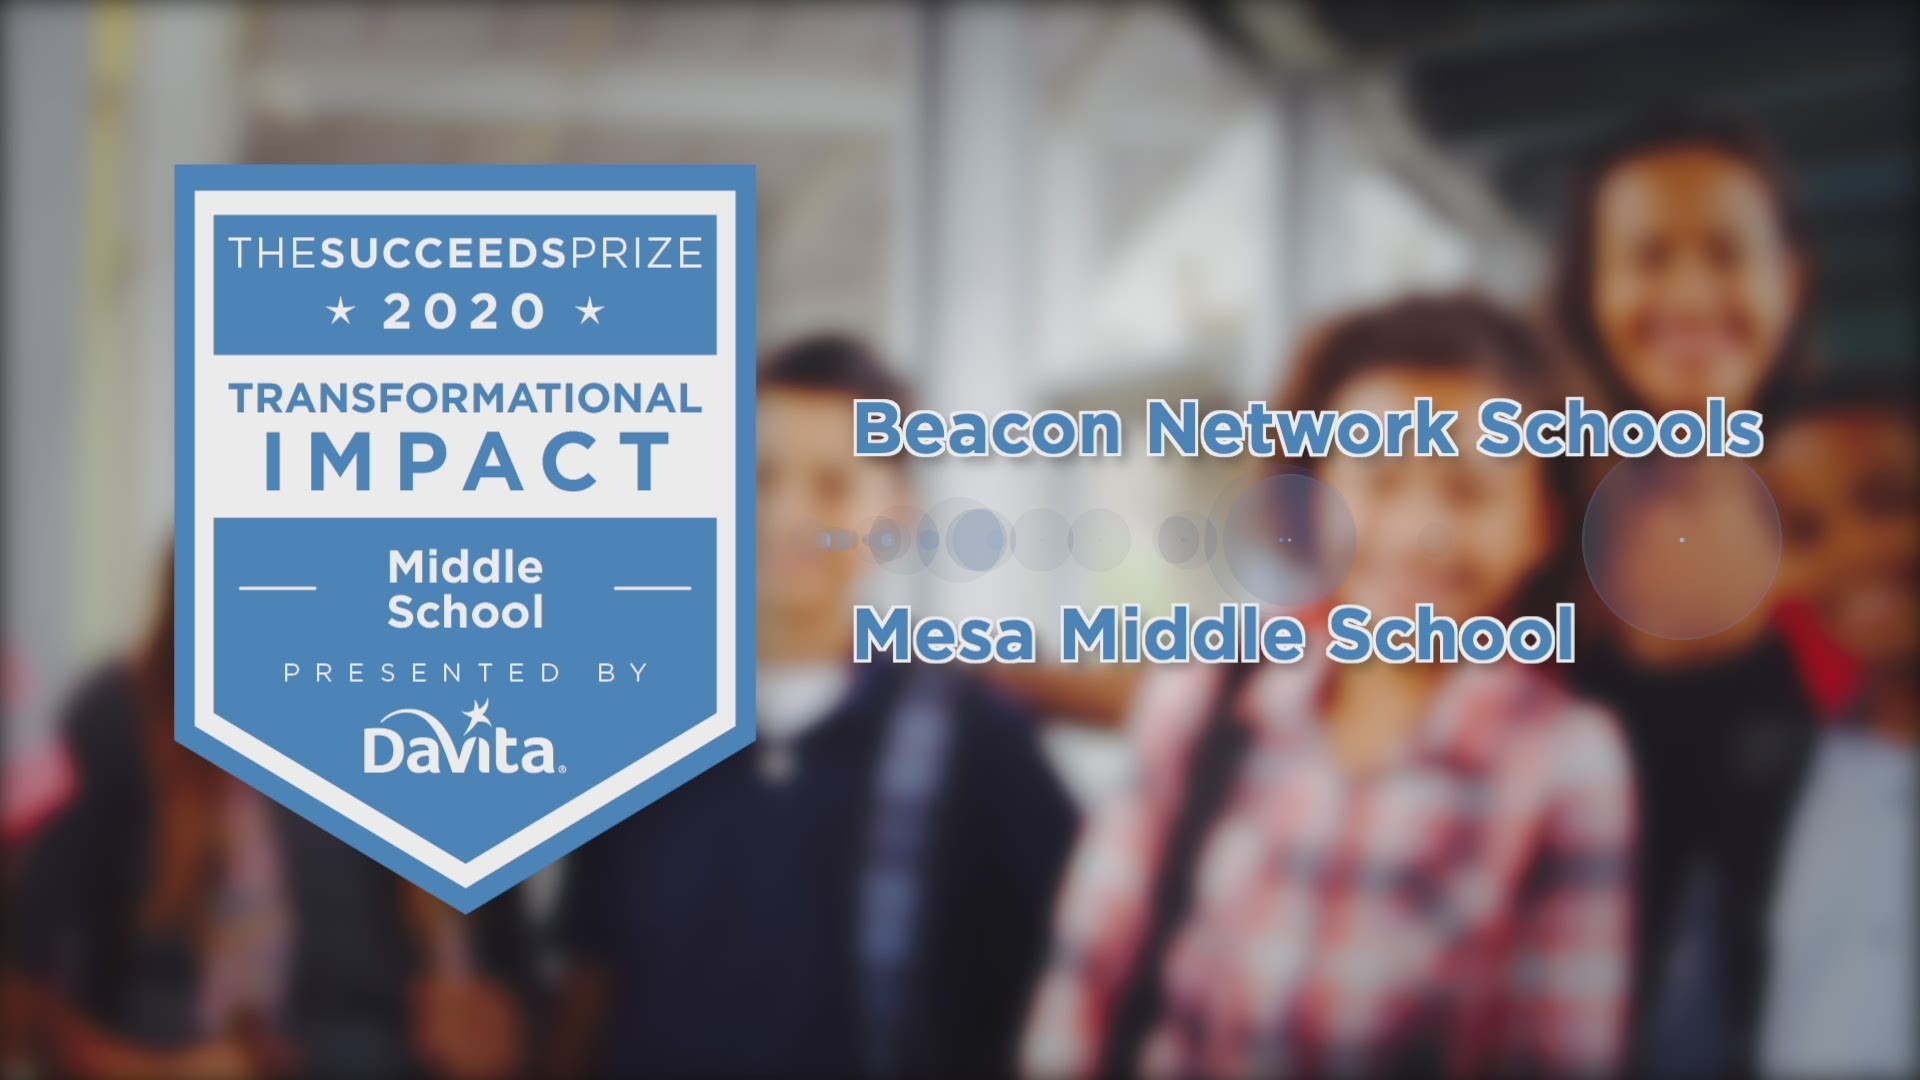 Beacon Network Schools in Denver won the 2020 Succeeds Prize for Transformational Impact in a Middle School award.